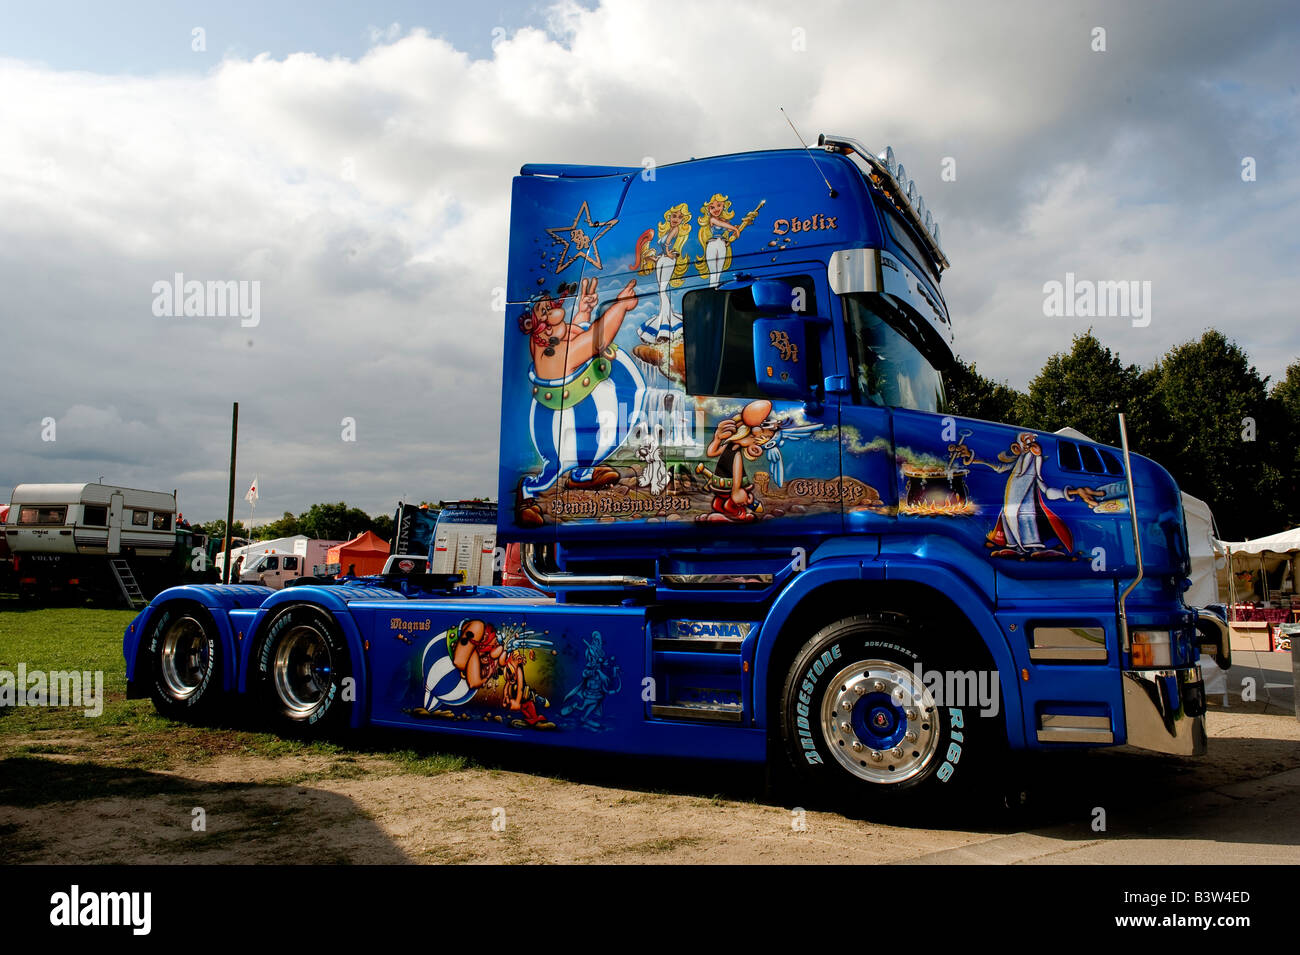 Scania T164 V8 2004 decorated as a conseptual truck featuring Asterix and Obelix This truck can be found at many excebitions whe Stock Photo